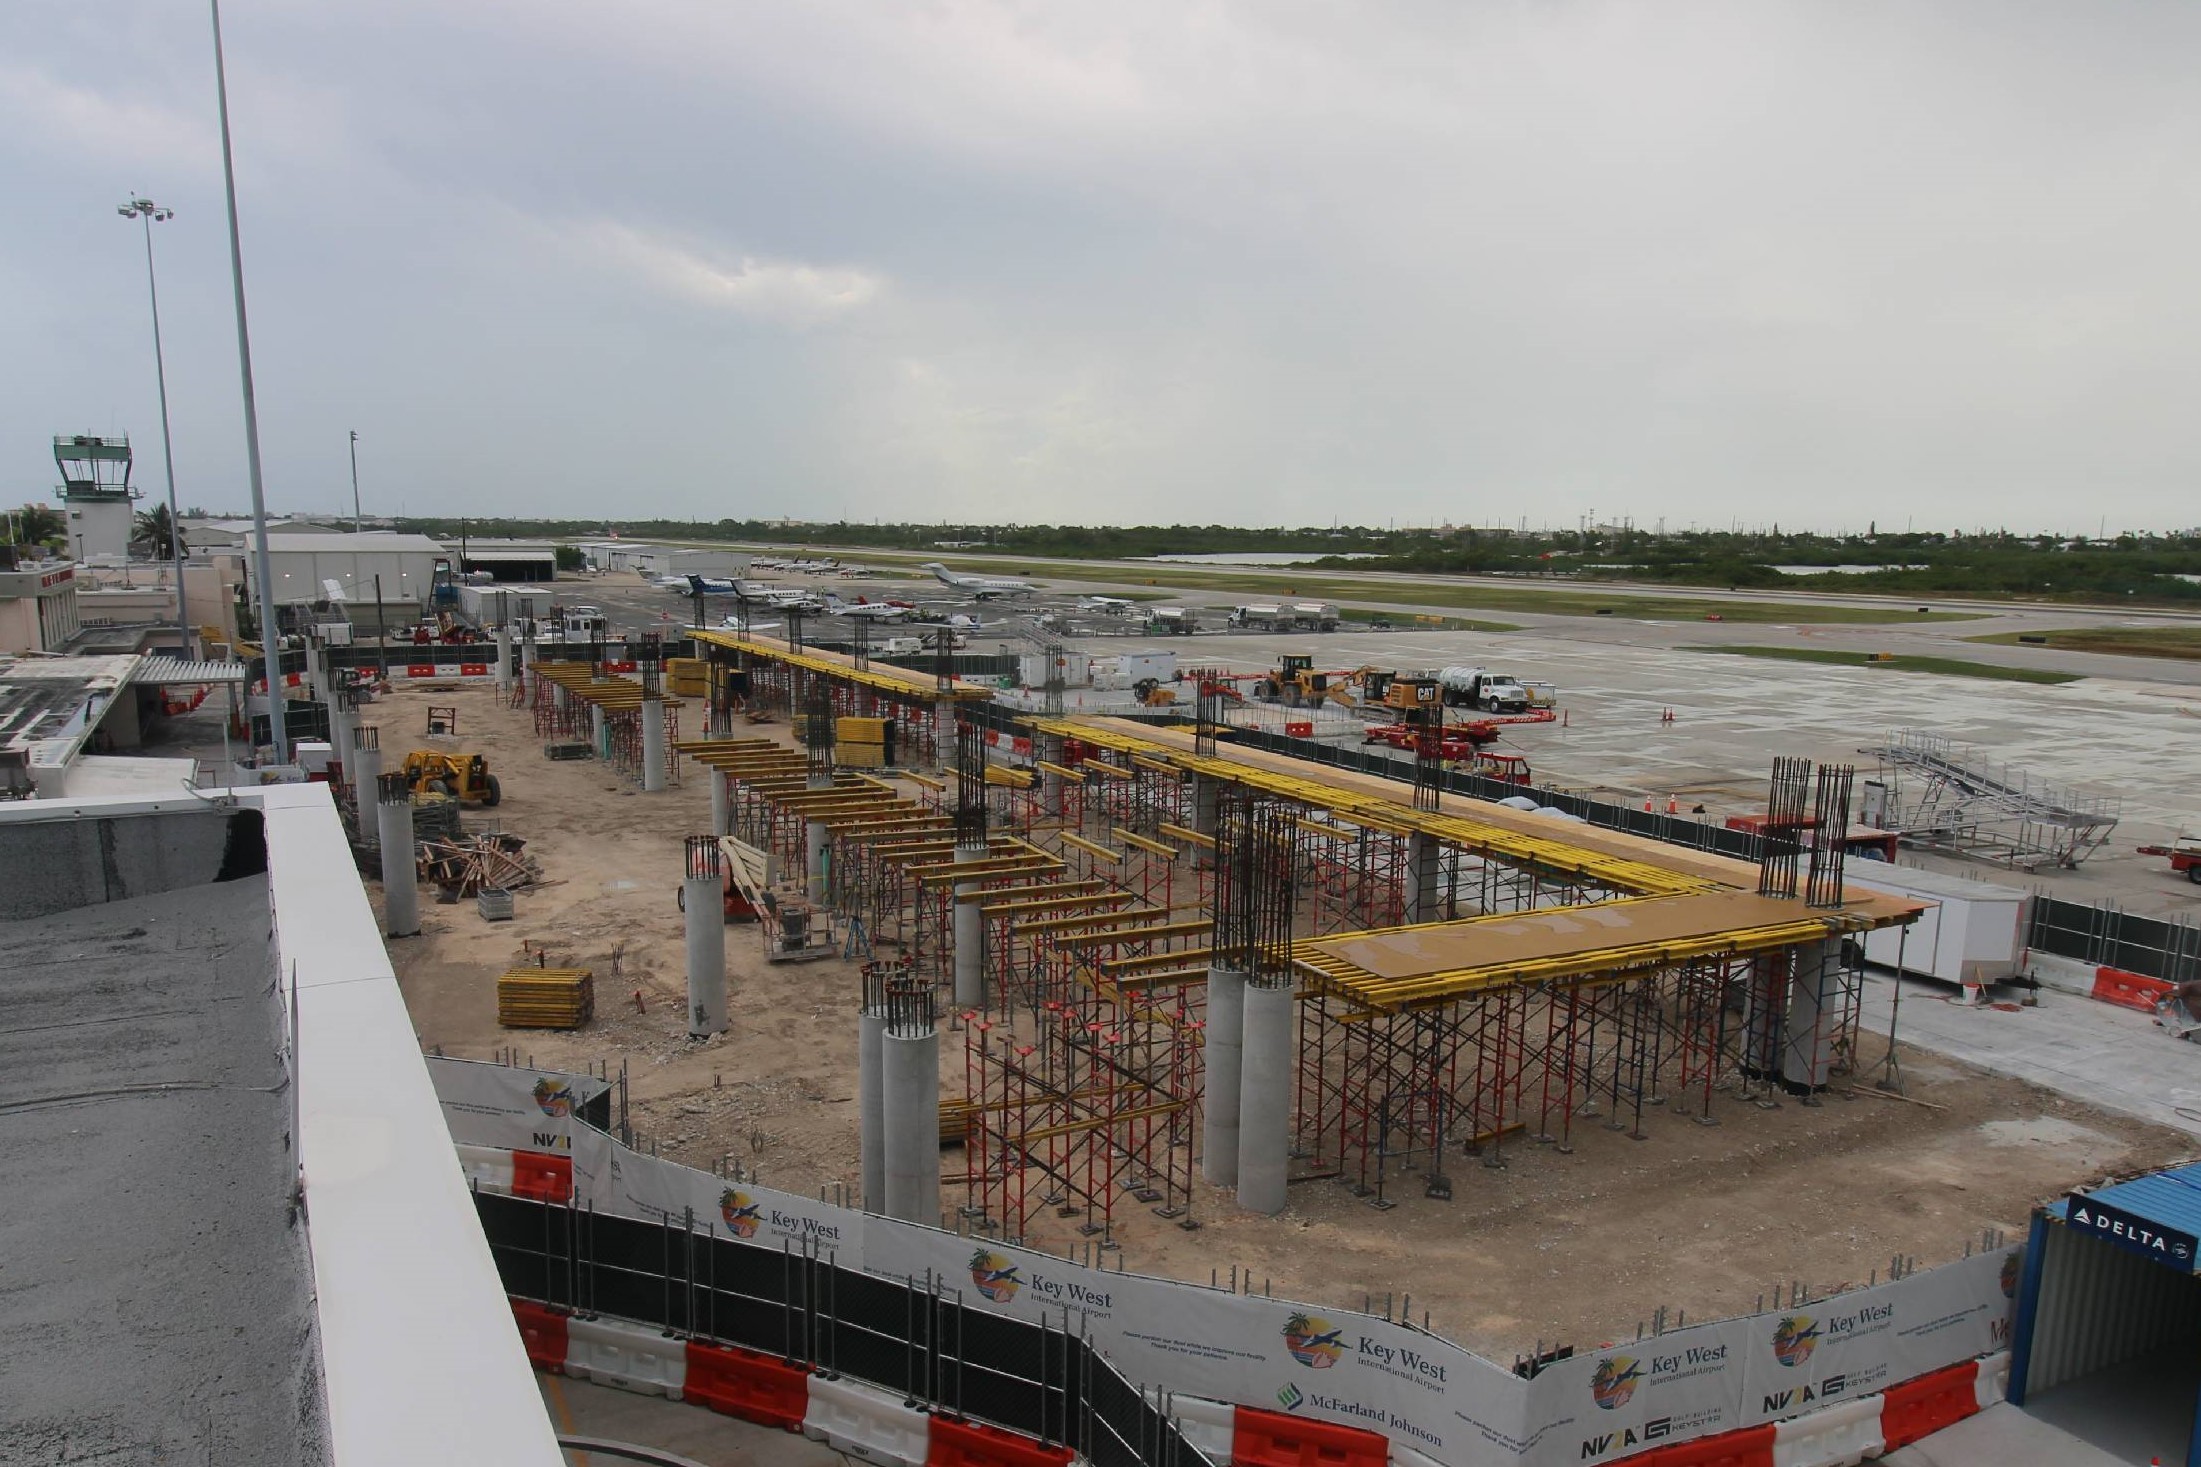 A photo of construction in progress, including preparation for concrete, at Key West International Airport.